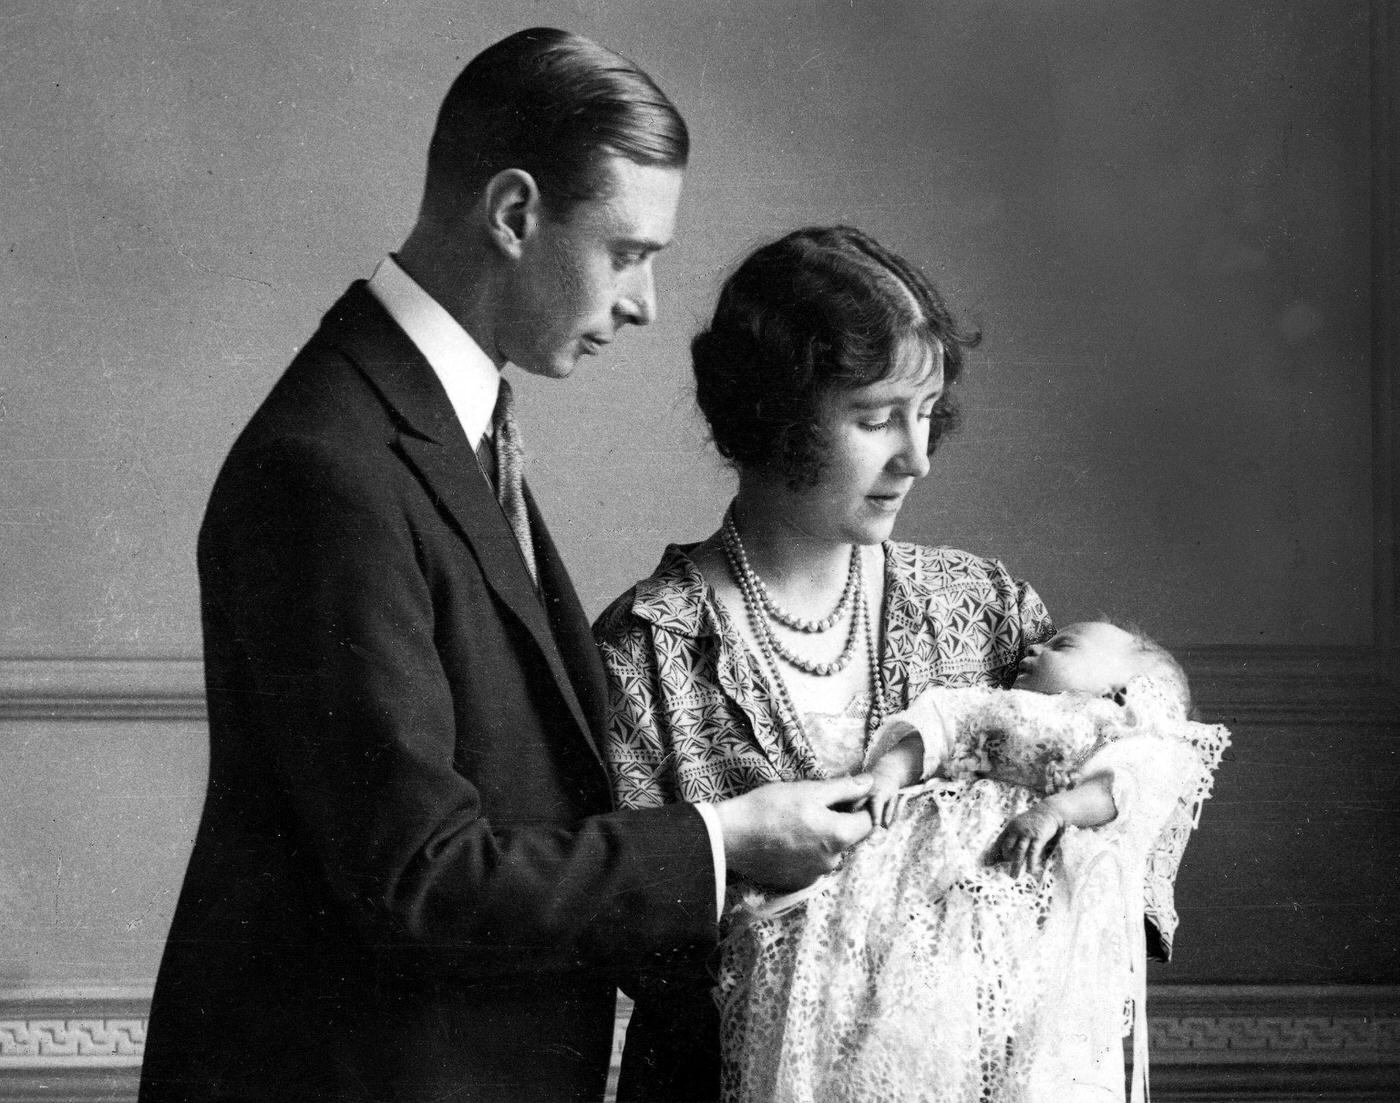 The Duke and Duchess of York with their daughter (later Queen Elizabeth II) as she sleeps in a precious christening robe, which has been used in the Royal Family for generations, 1926.